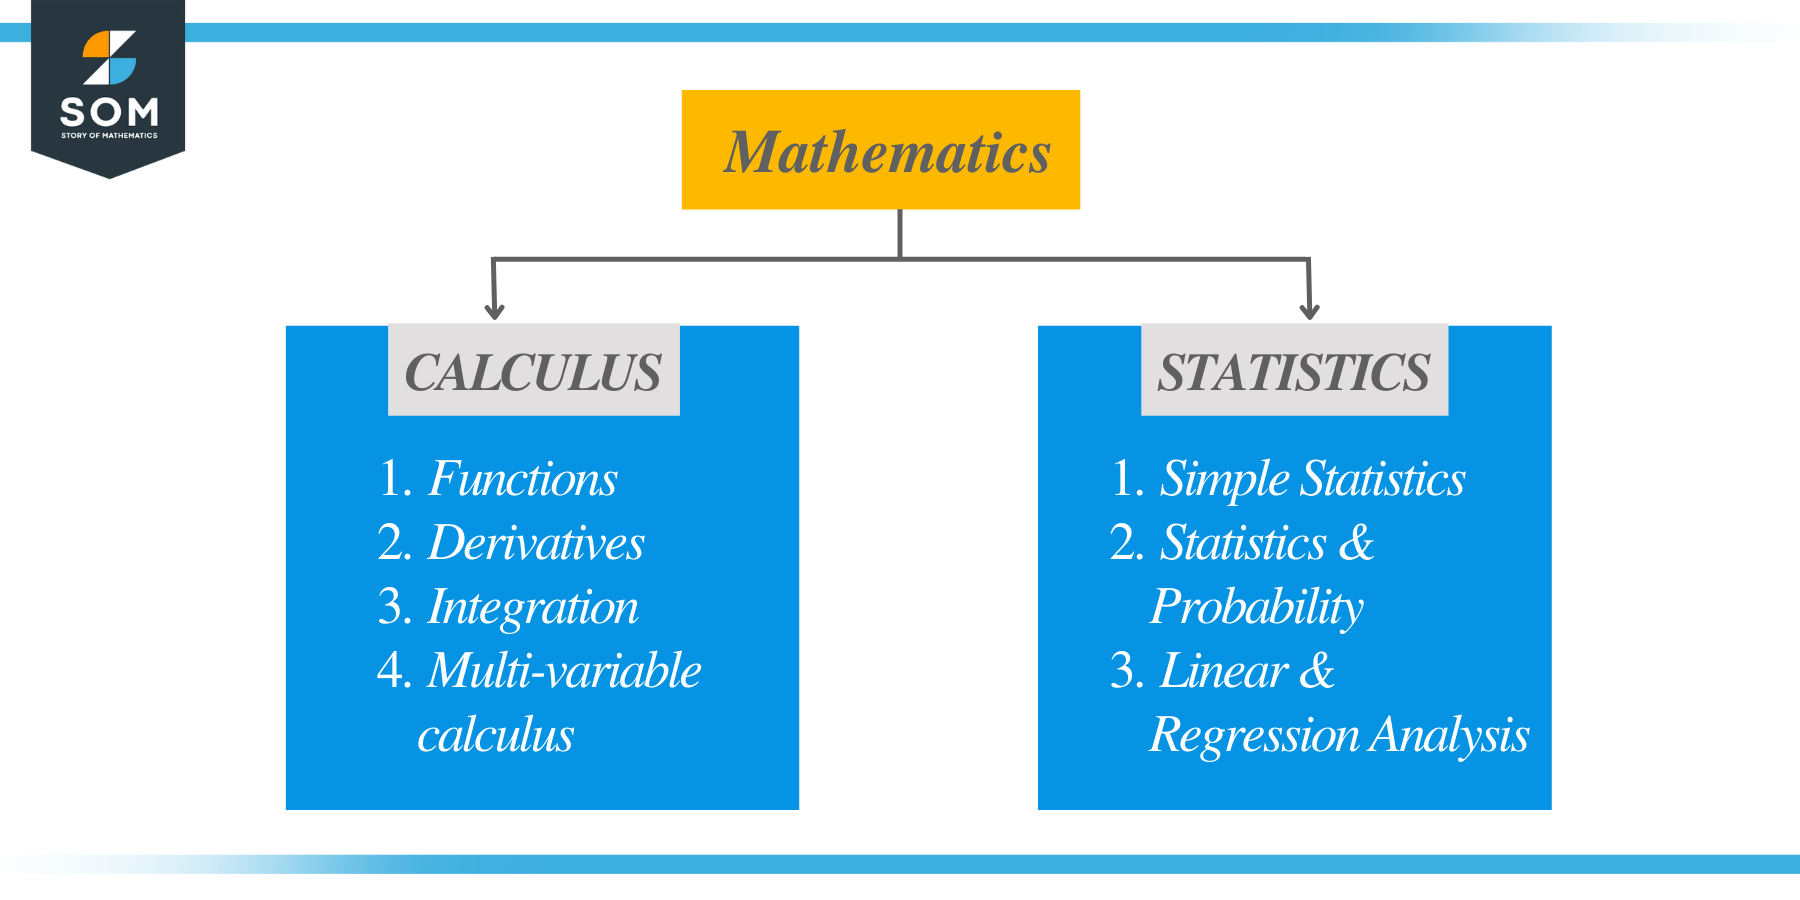 Is Statistics Harder Than Calculus?